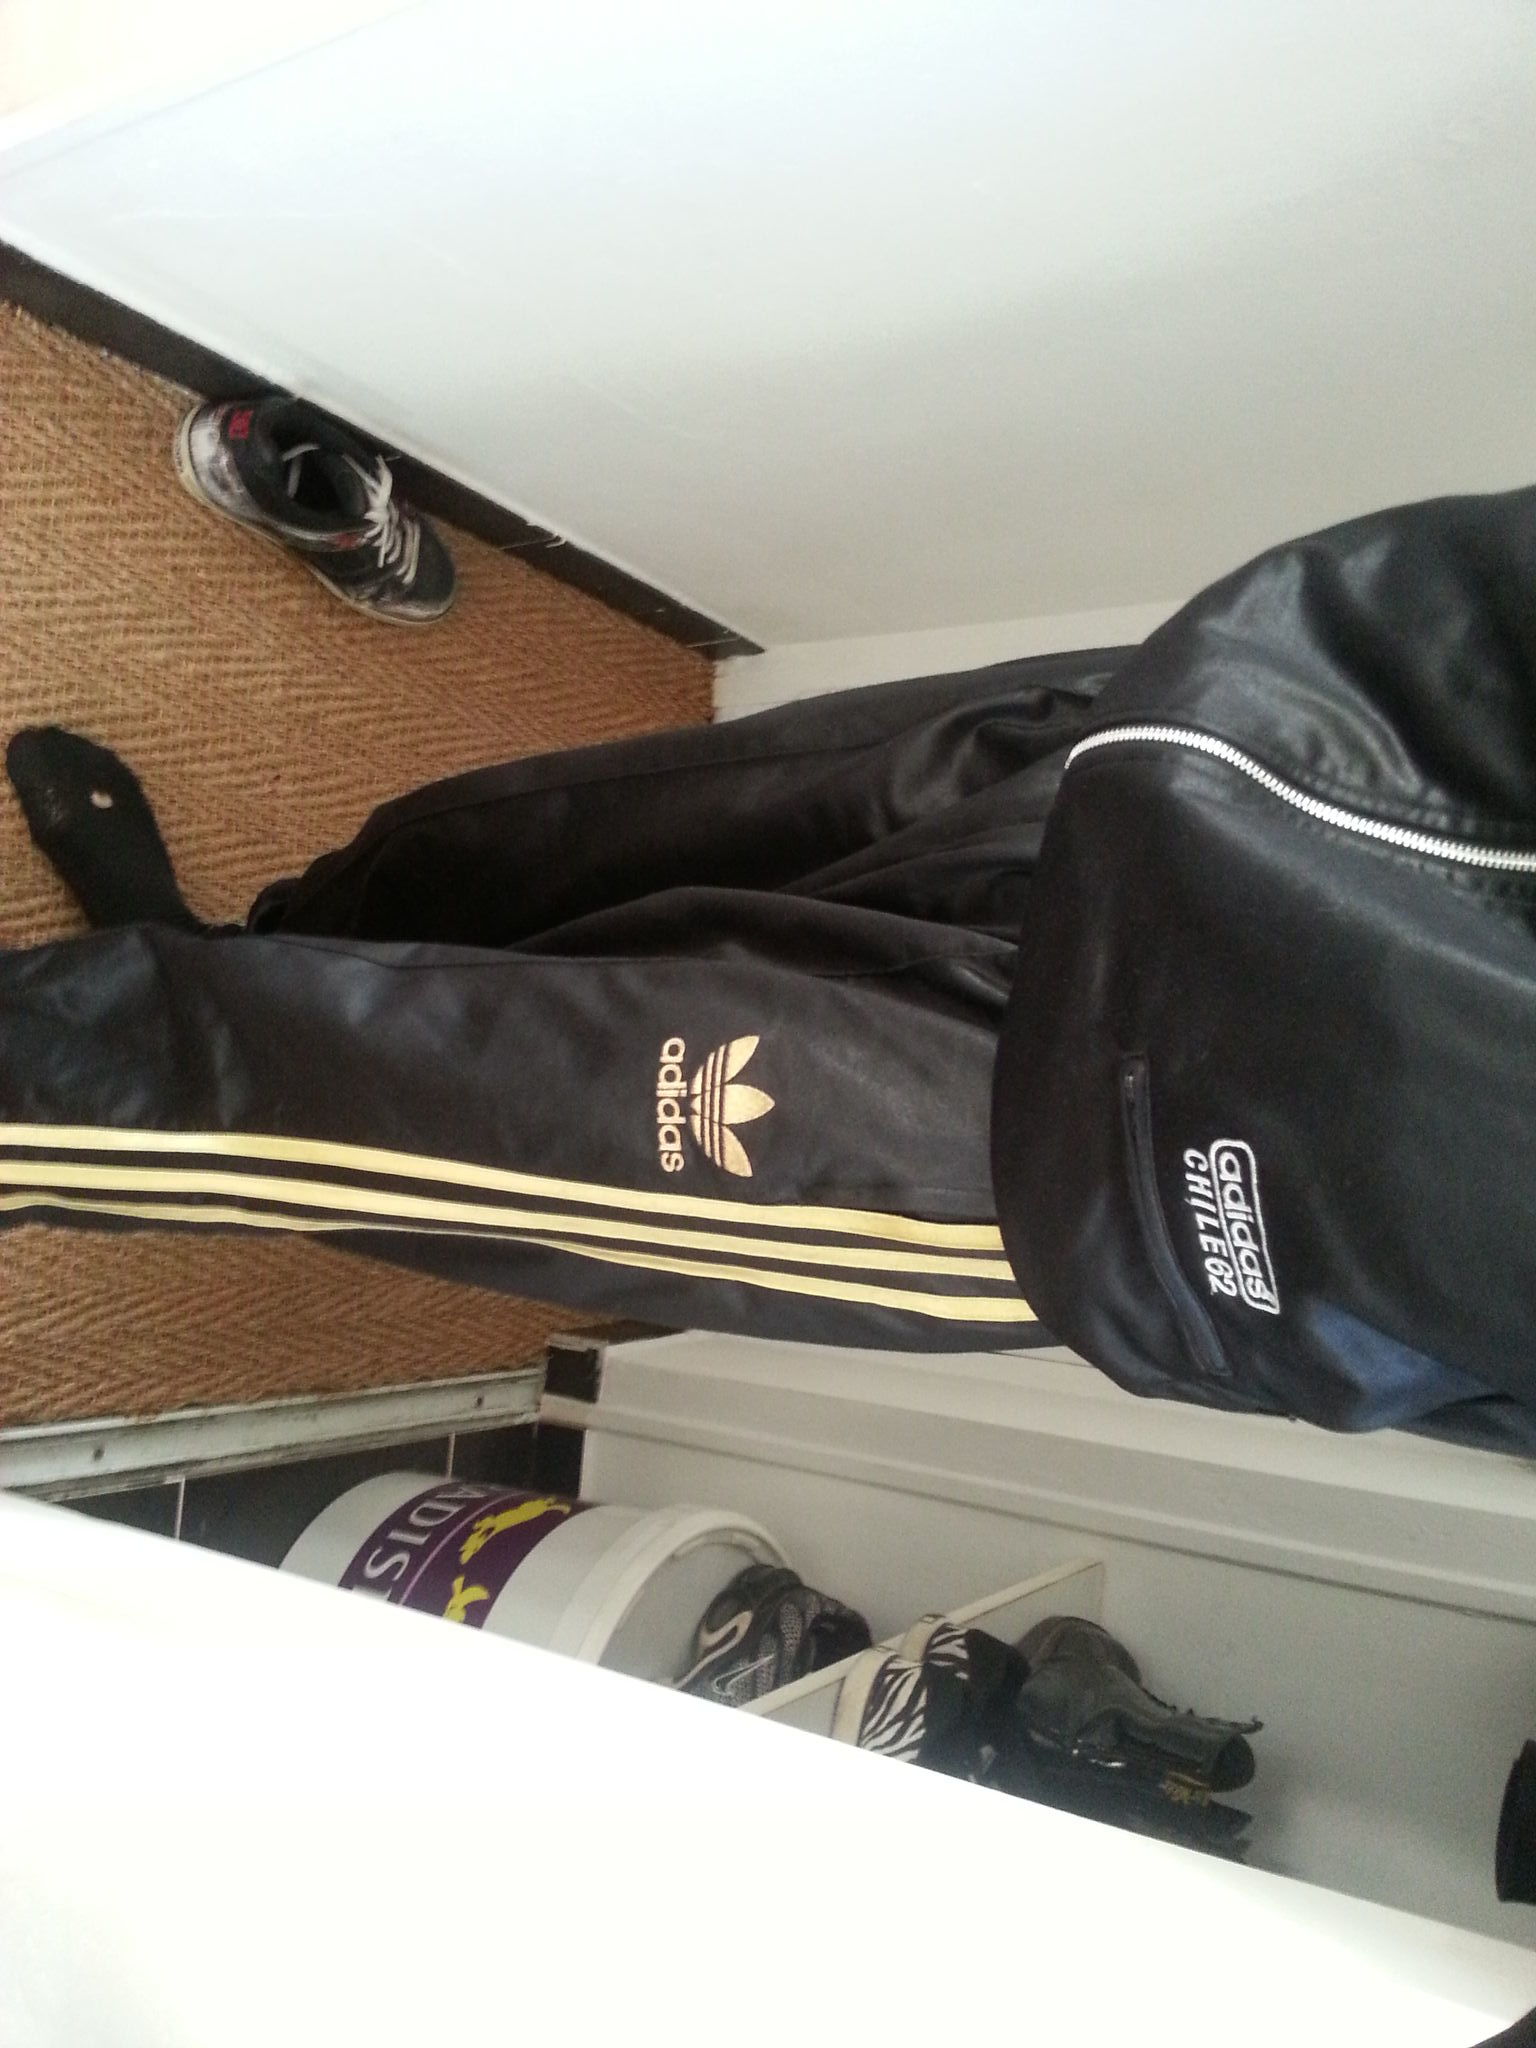 Adidas Chile62 size L - Black and Gold - Shiny